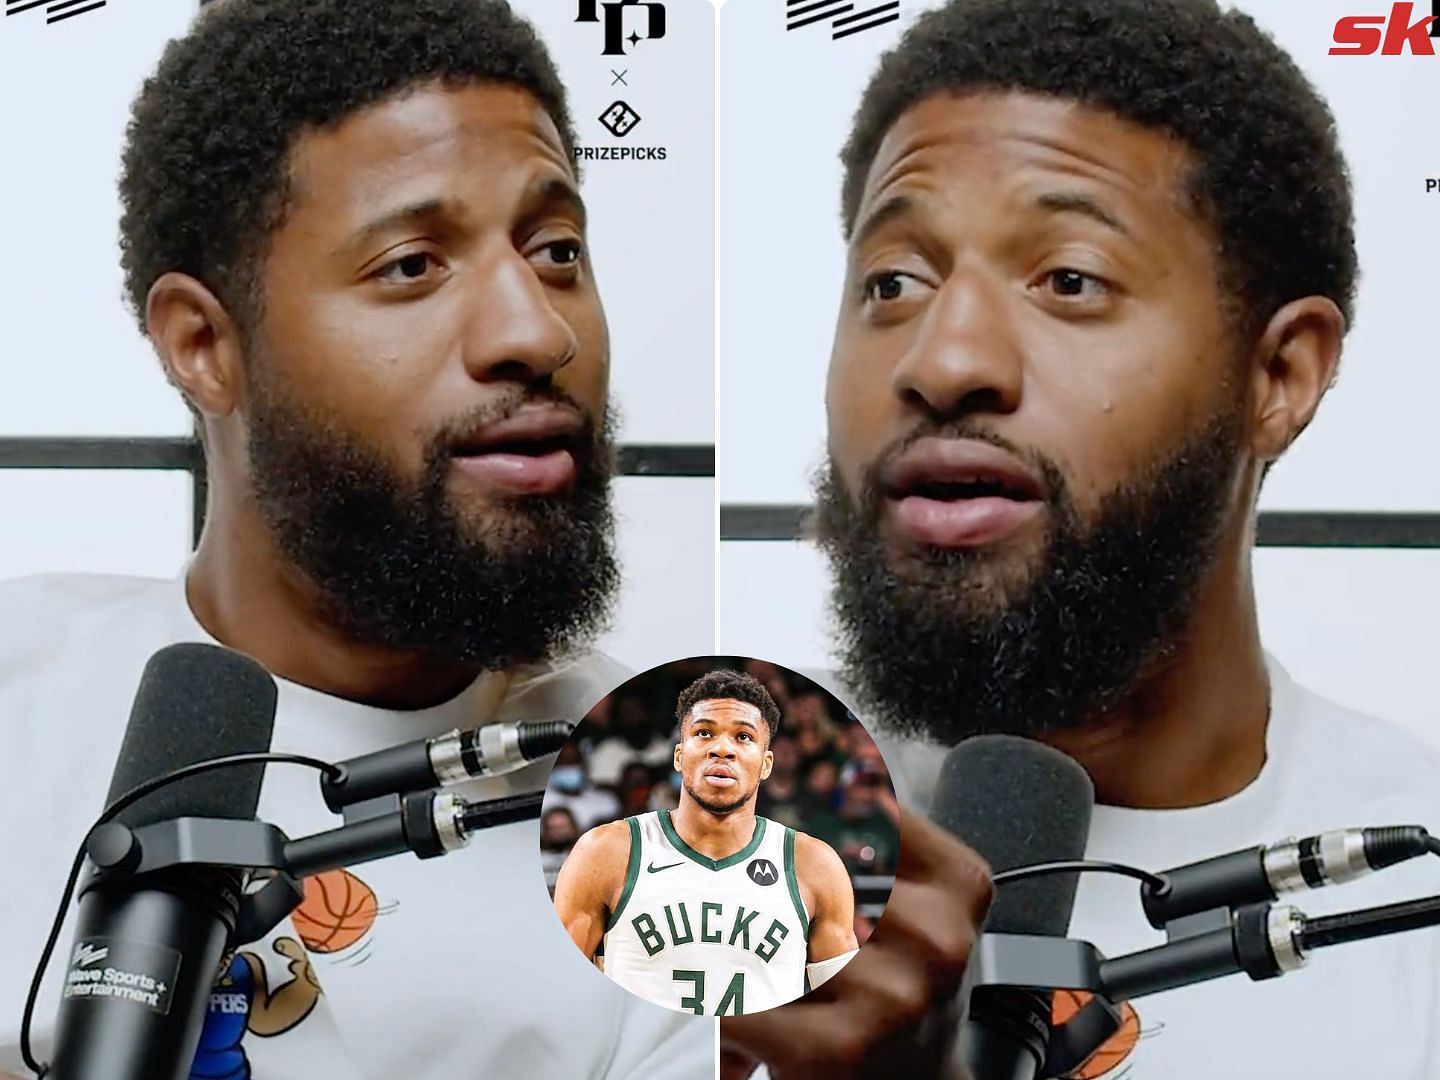 Paul George does a hilarious re-creation of Giannis Antetokounmpo throwing no-look passes